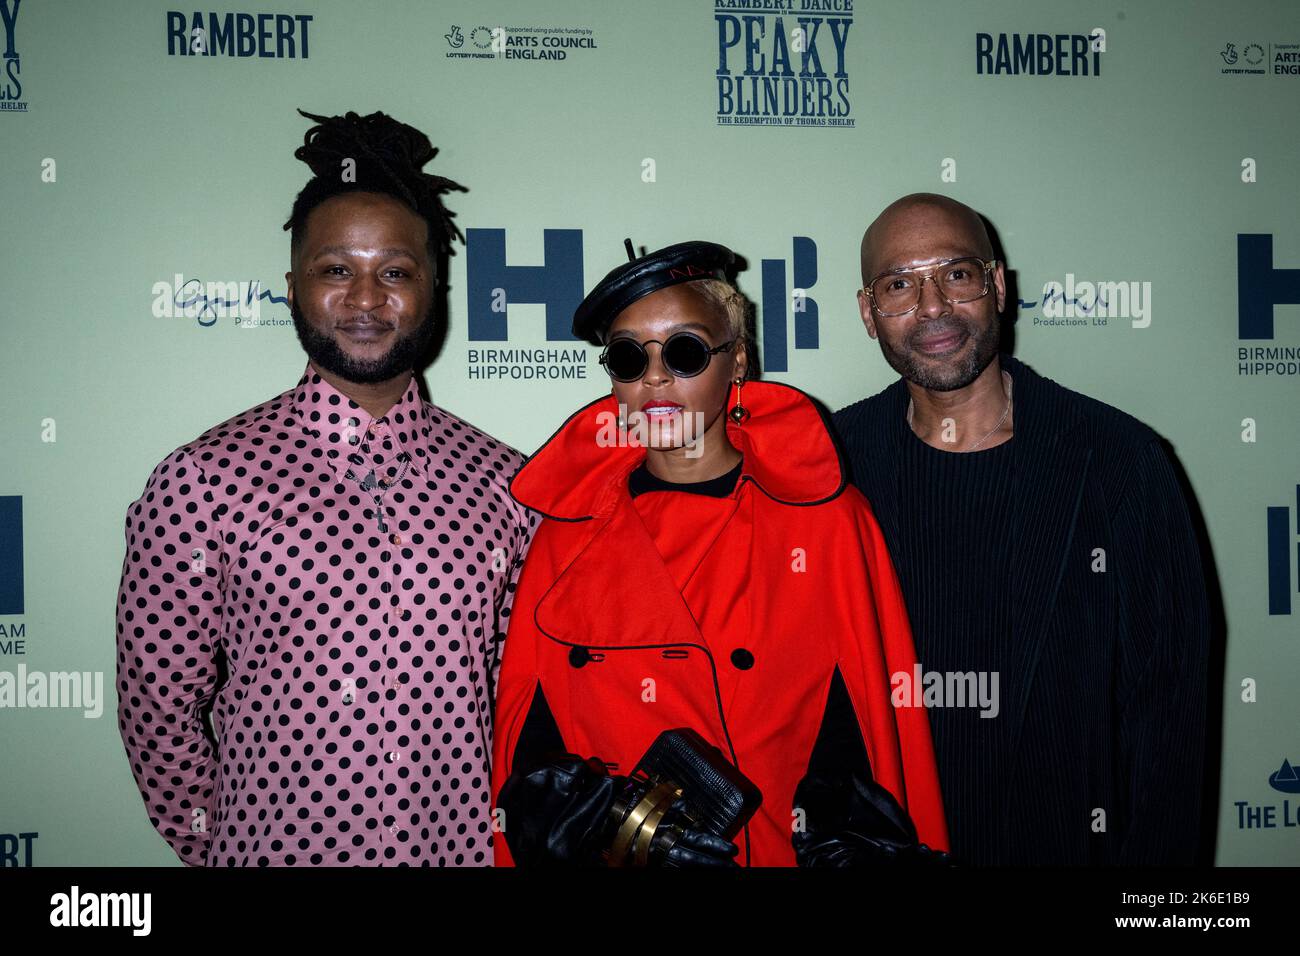 London, UK.  13 October 2022. (L to R) Roman GianArthur, Janelle Monáe and Benoit Swan Pouffer, Artistic Director Rambert, at the London opening of Rambert’s Peaky Blinders: The Redemption of Thomas Shelby at Troubadour Wembley Park Theatre.  The show runs to 6th November 2022.  Credit: Stephen Chung / EMPICS / Alamy Live News Stock Photo